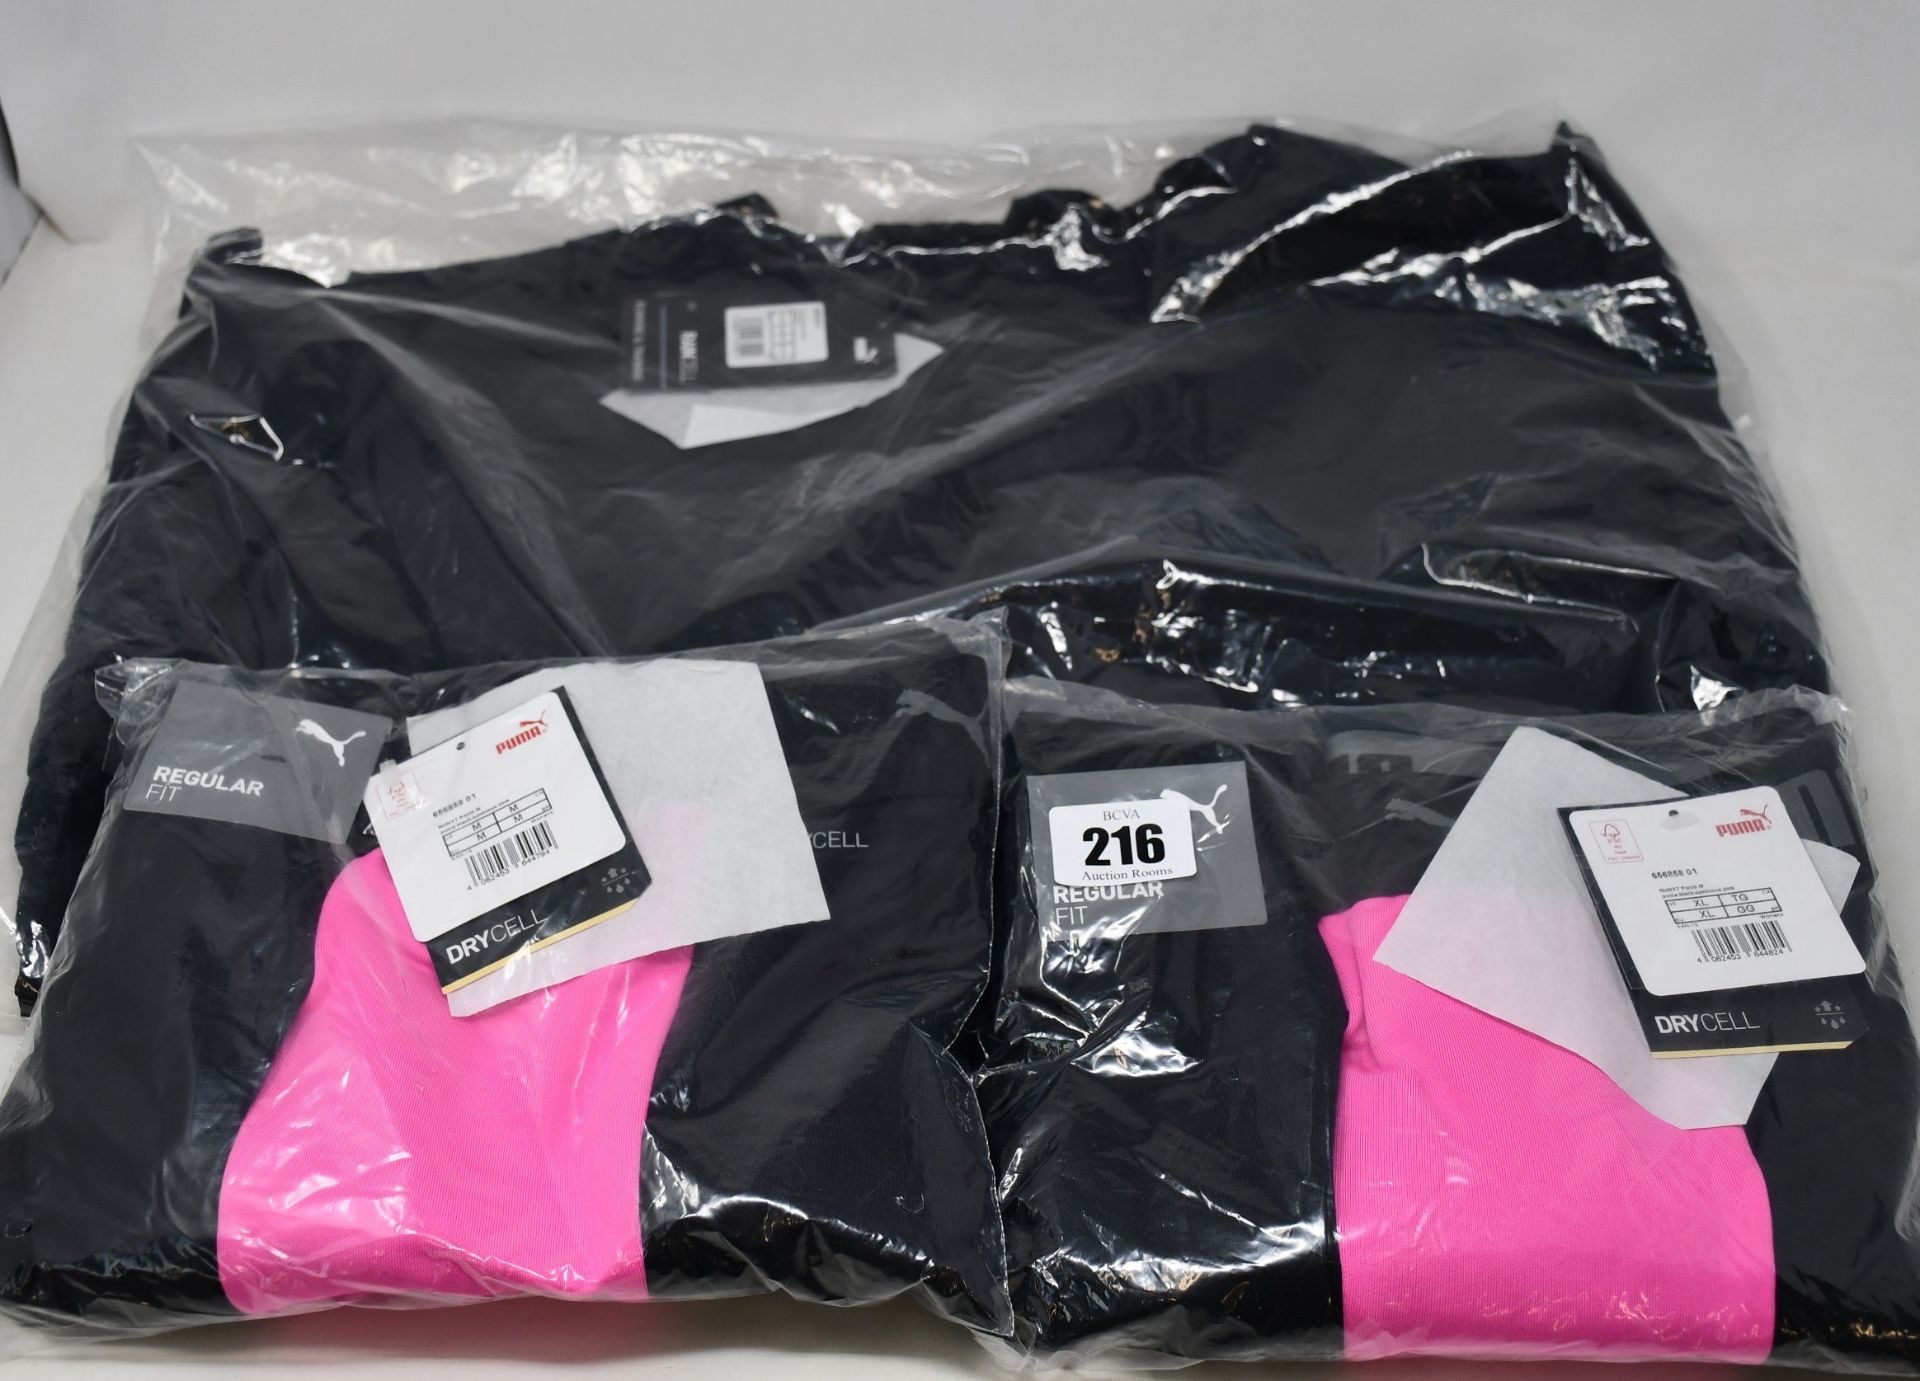 Four pairs of women's as new Puma ftblNXT football sweatpants (S, M, L, XL - RRP £35 each) and a